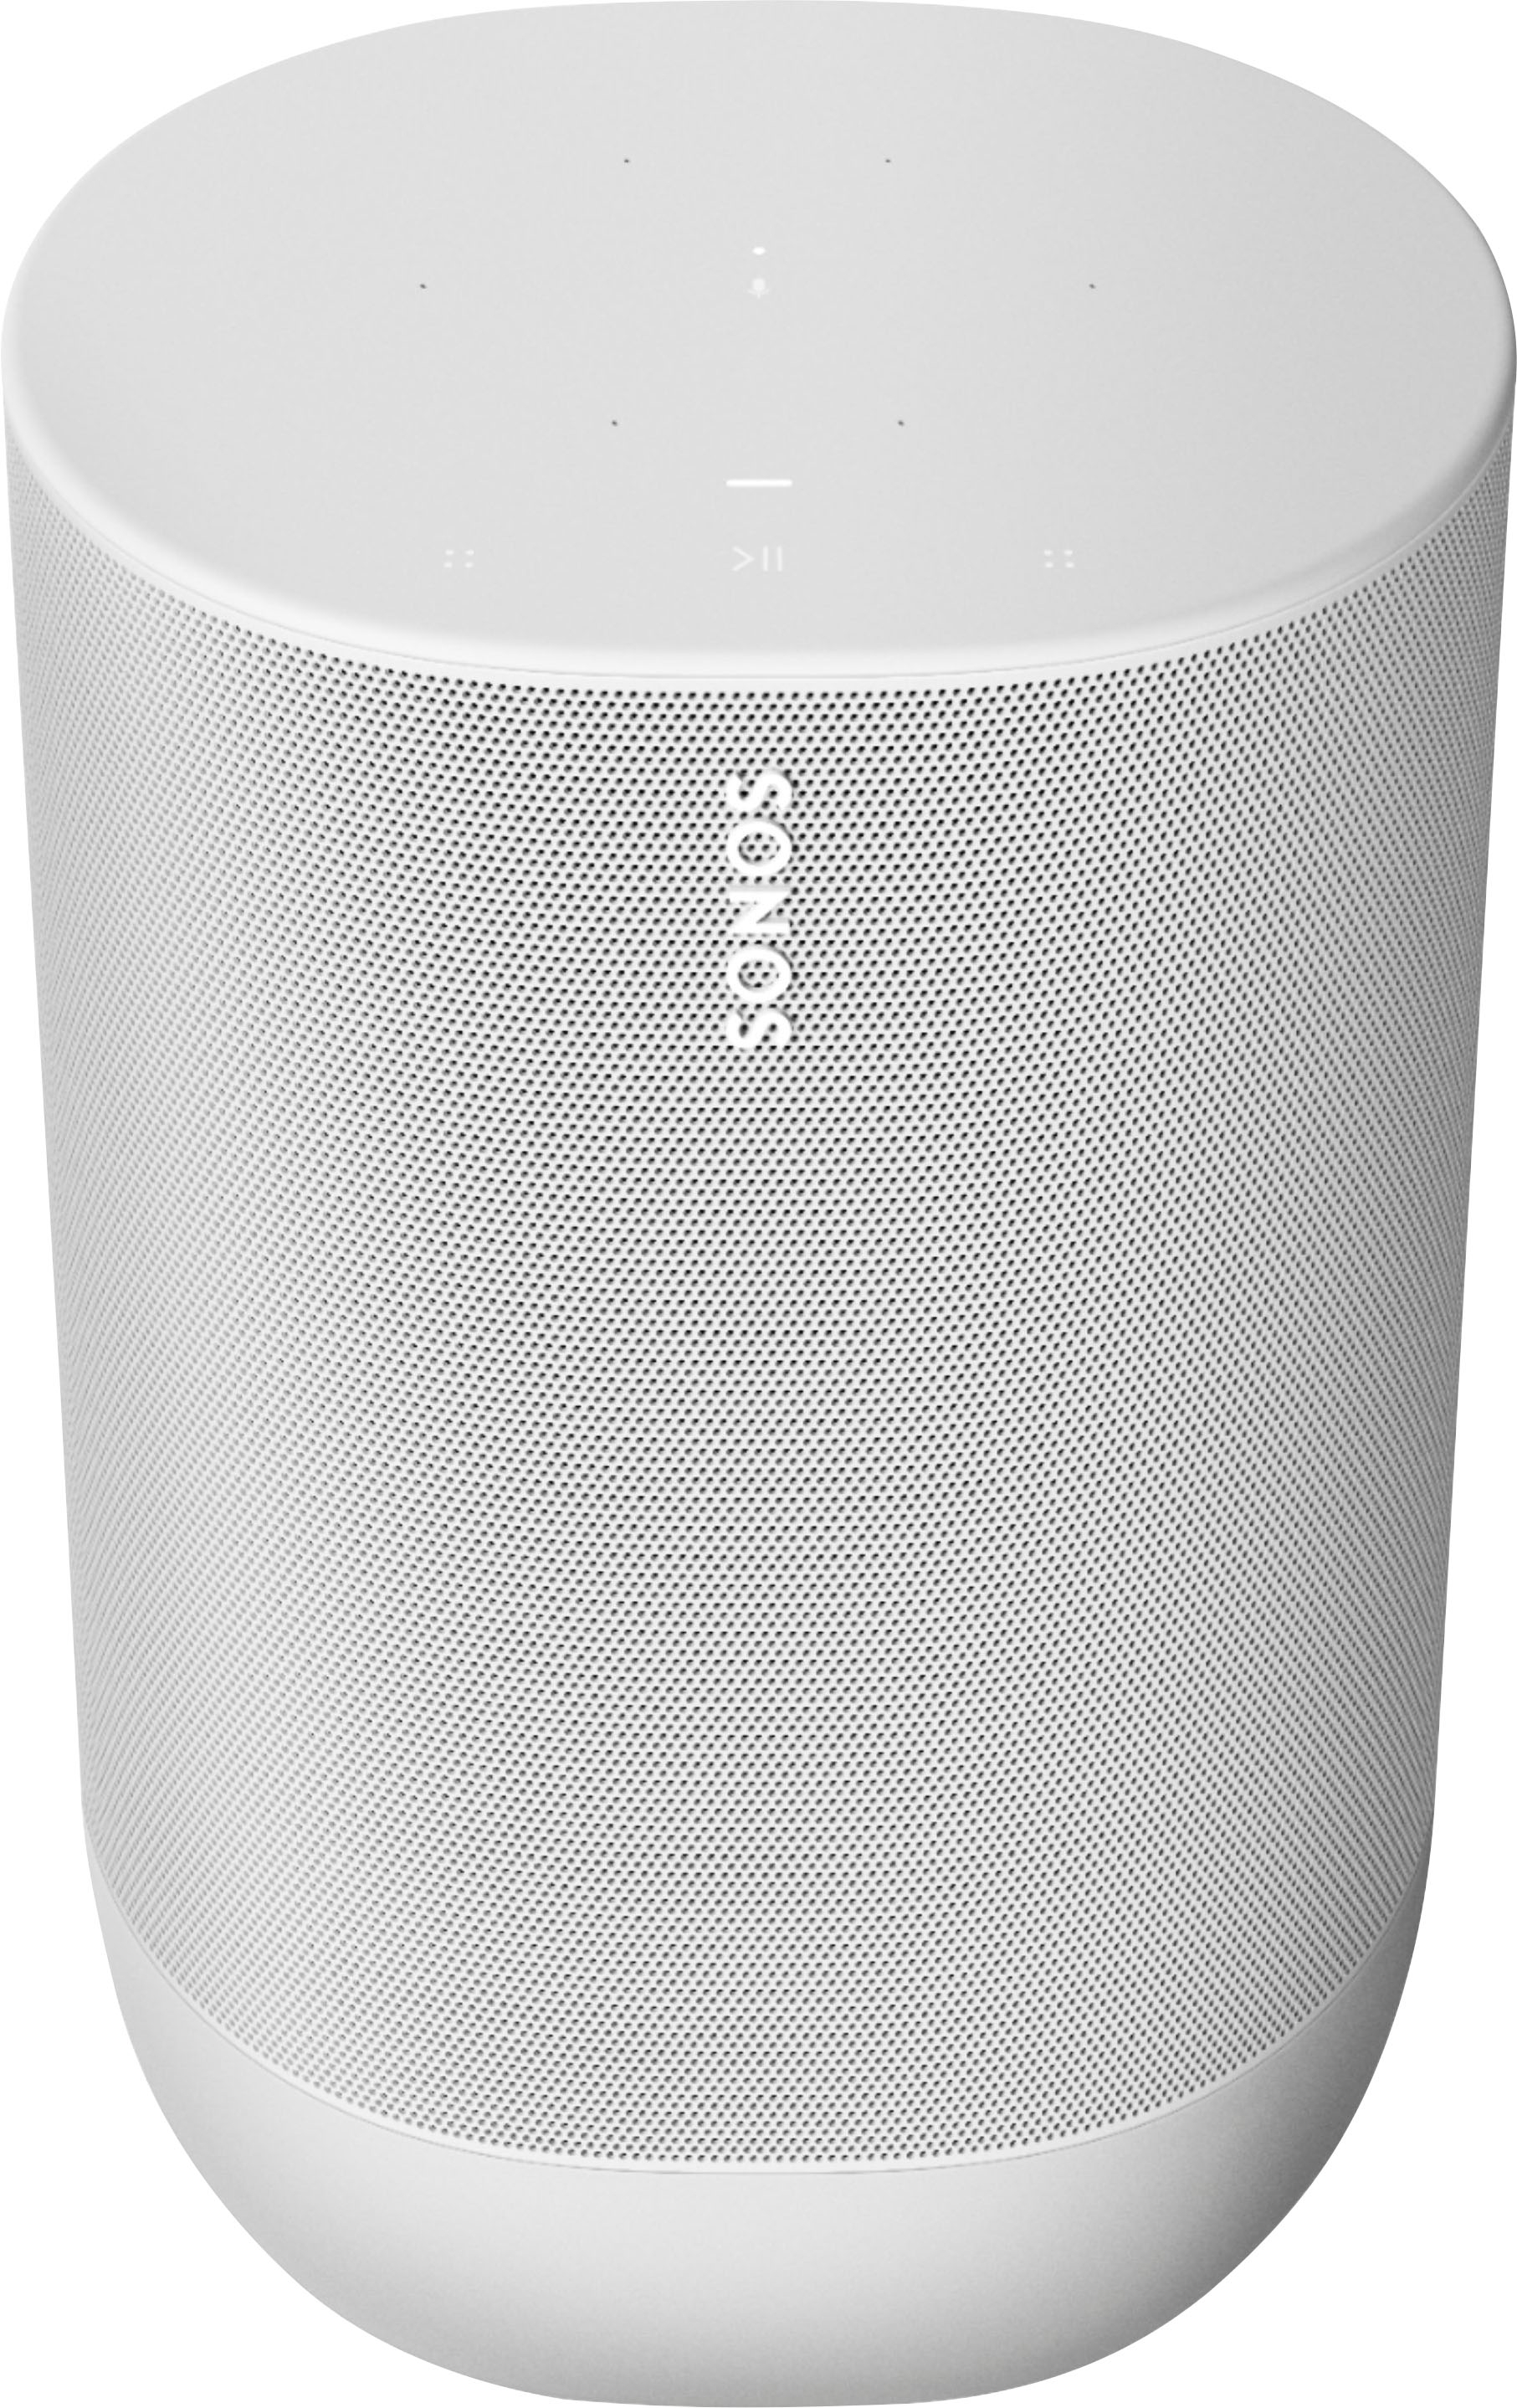 Angle View: Sonos - Geek Squad Certified Refurbished Move Smart Portable Wi-Fi and Bluetooth Speaker with Alexa and Google Assistant - White